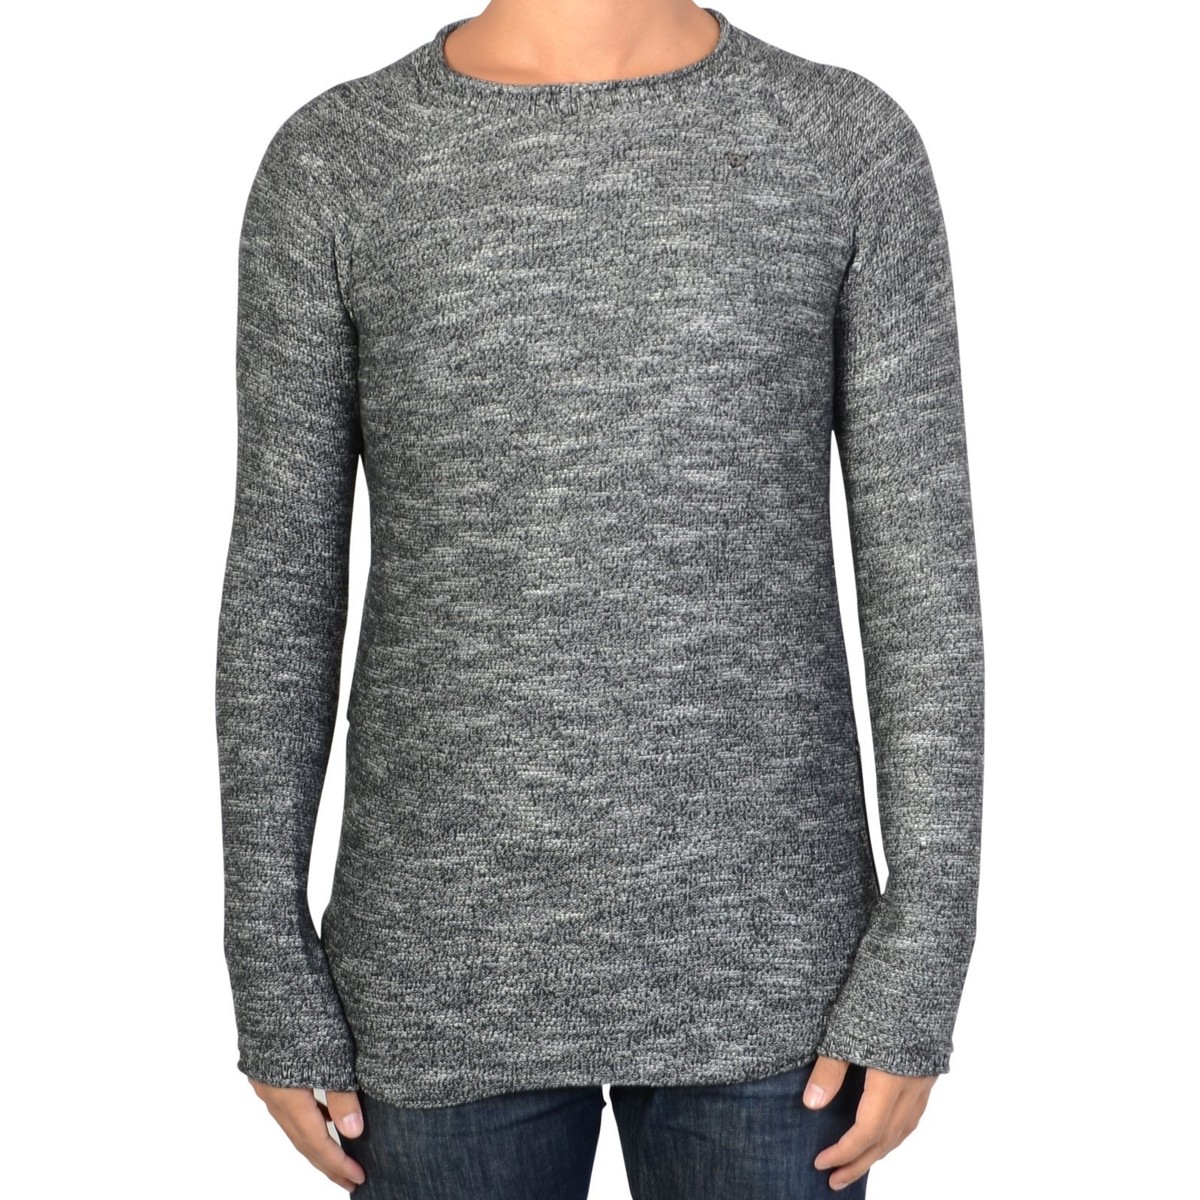 Vêtements Homme Pulls Fifty Four Pull Ditty Gris Gris